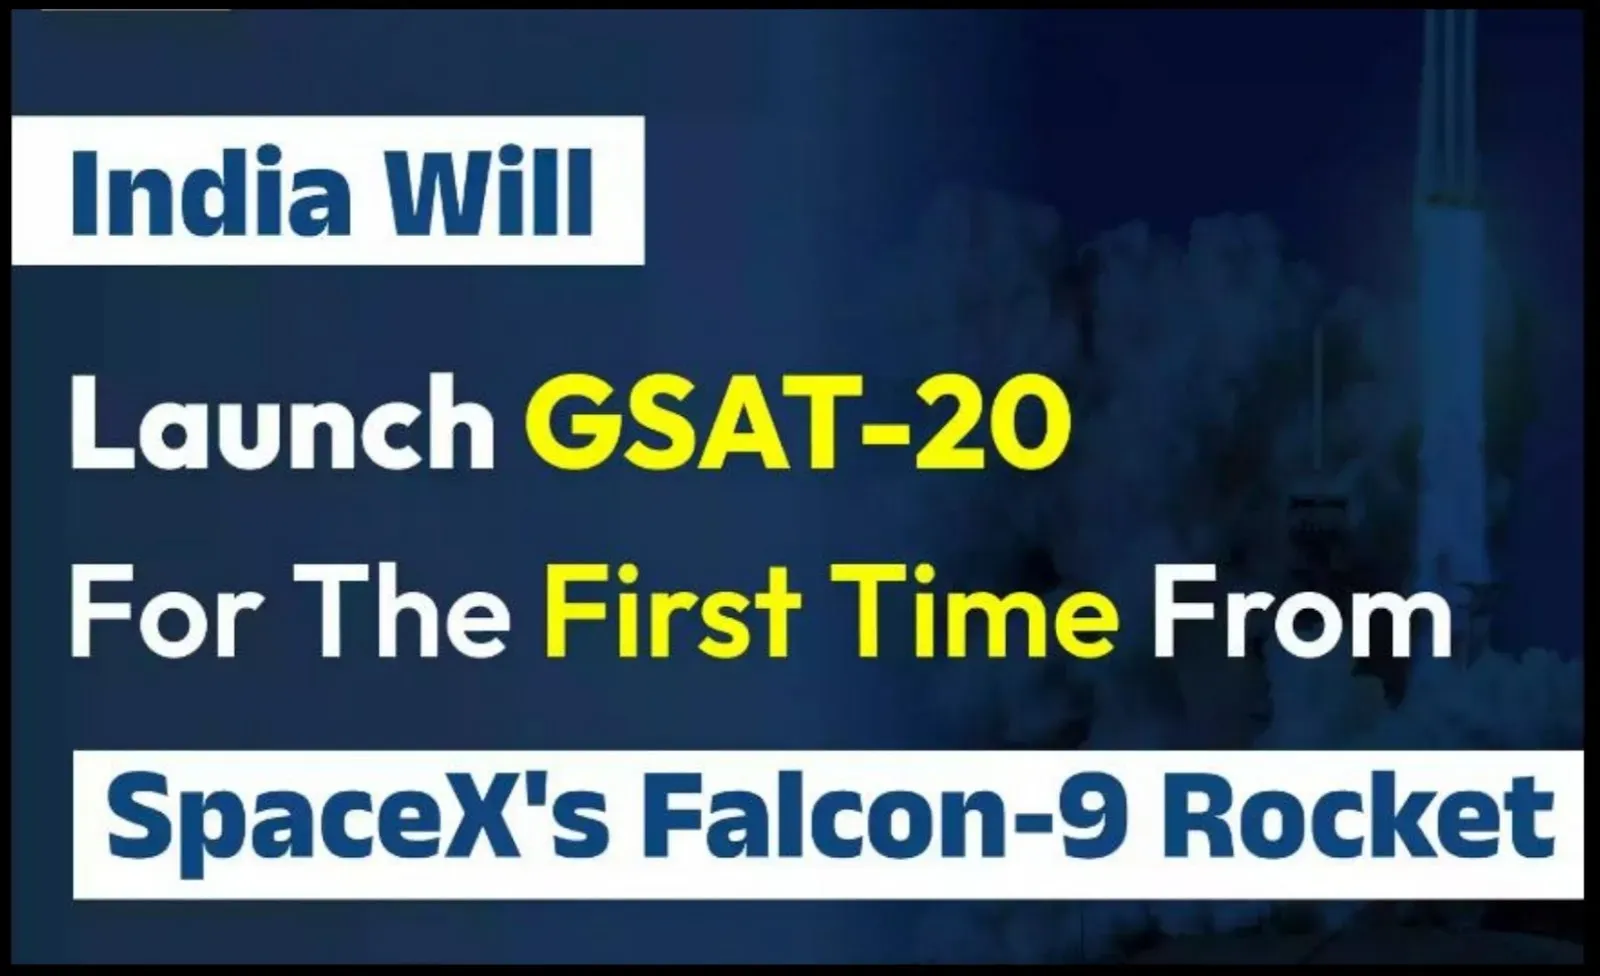 India will launch 'GSAT-20' for the first time from SpaceX's Falcon-9 rocket